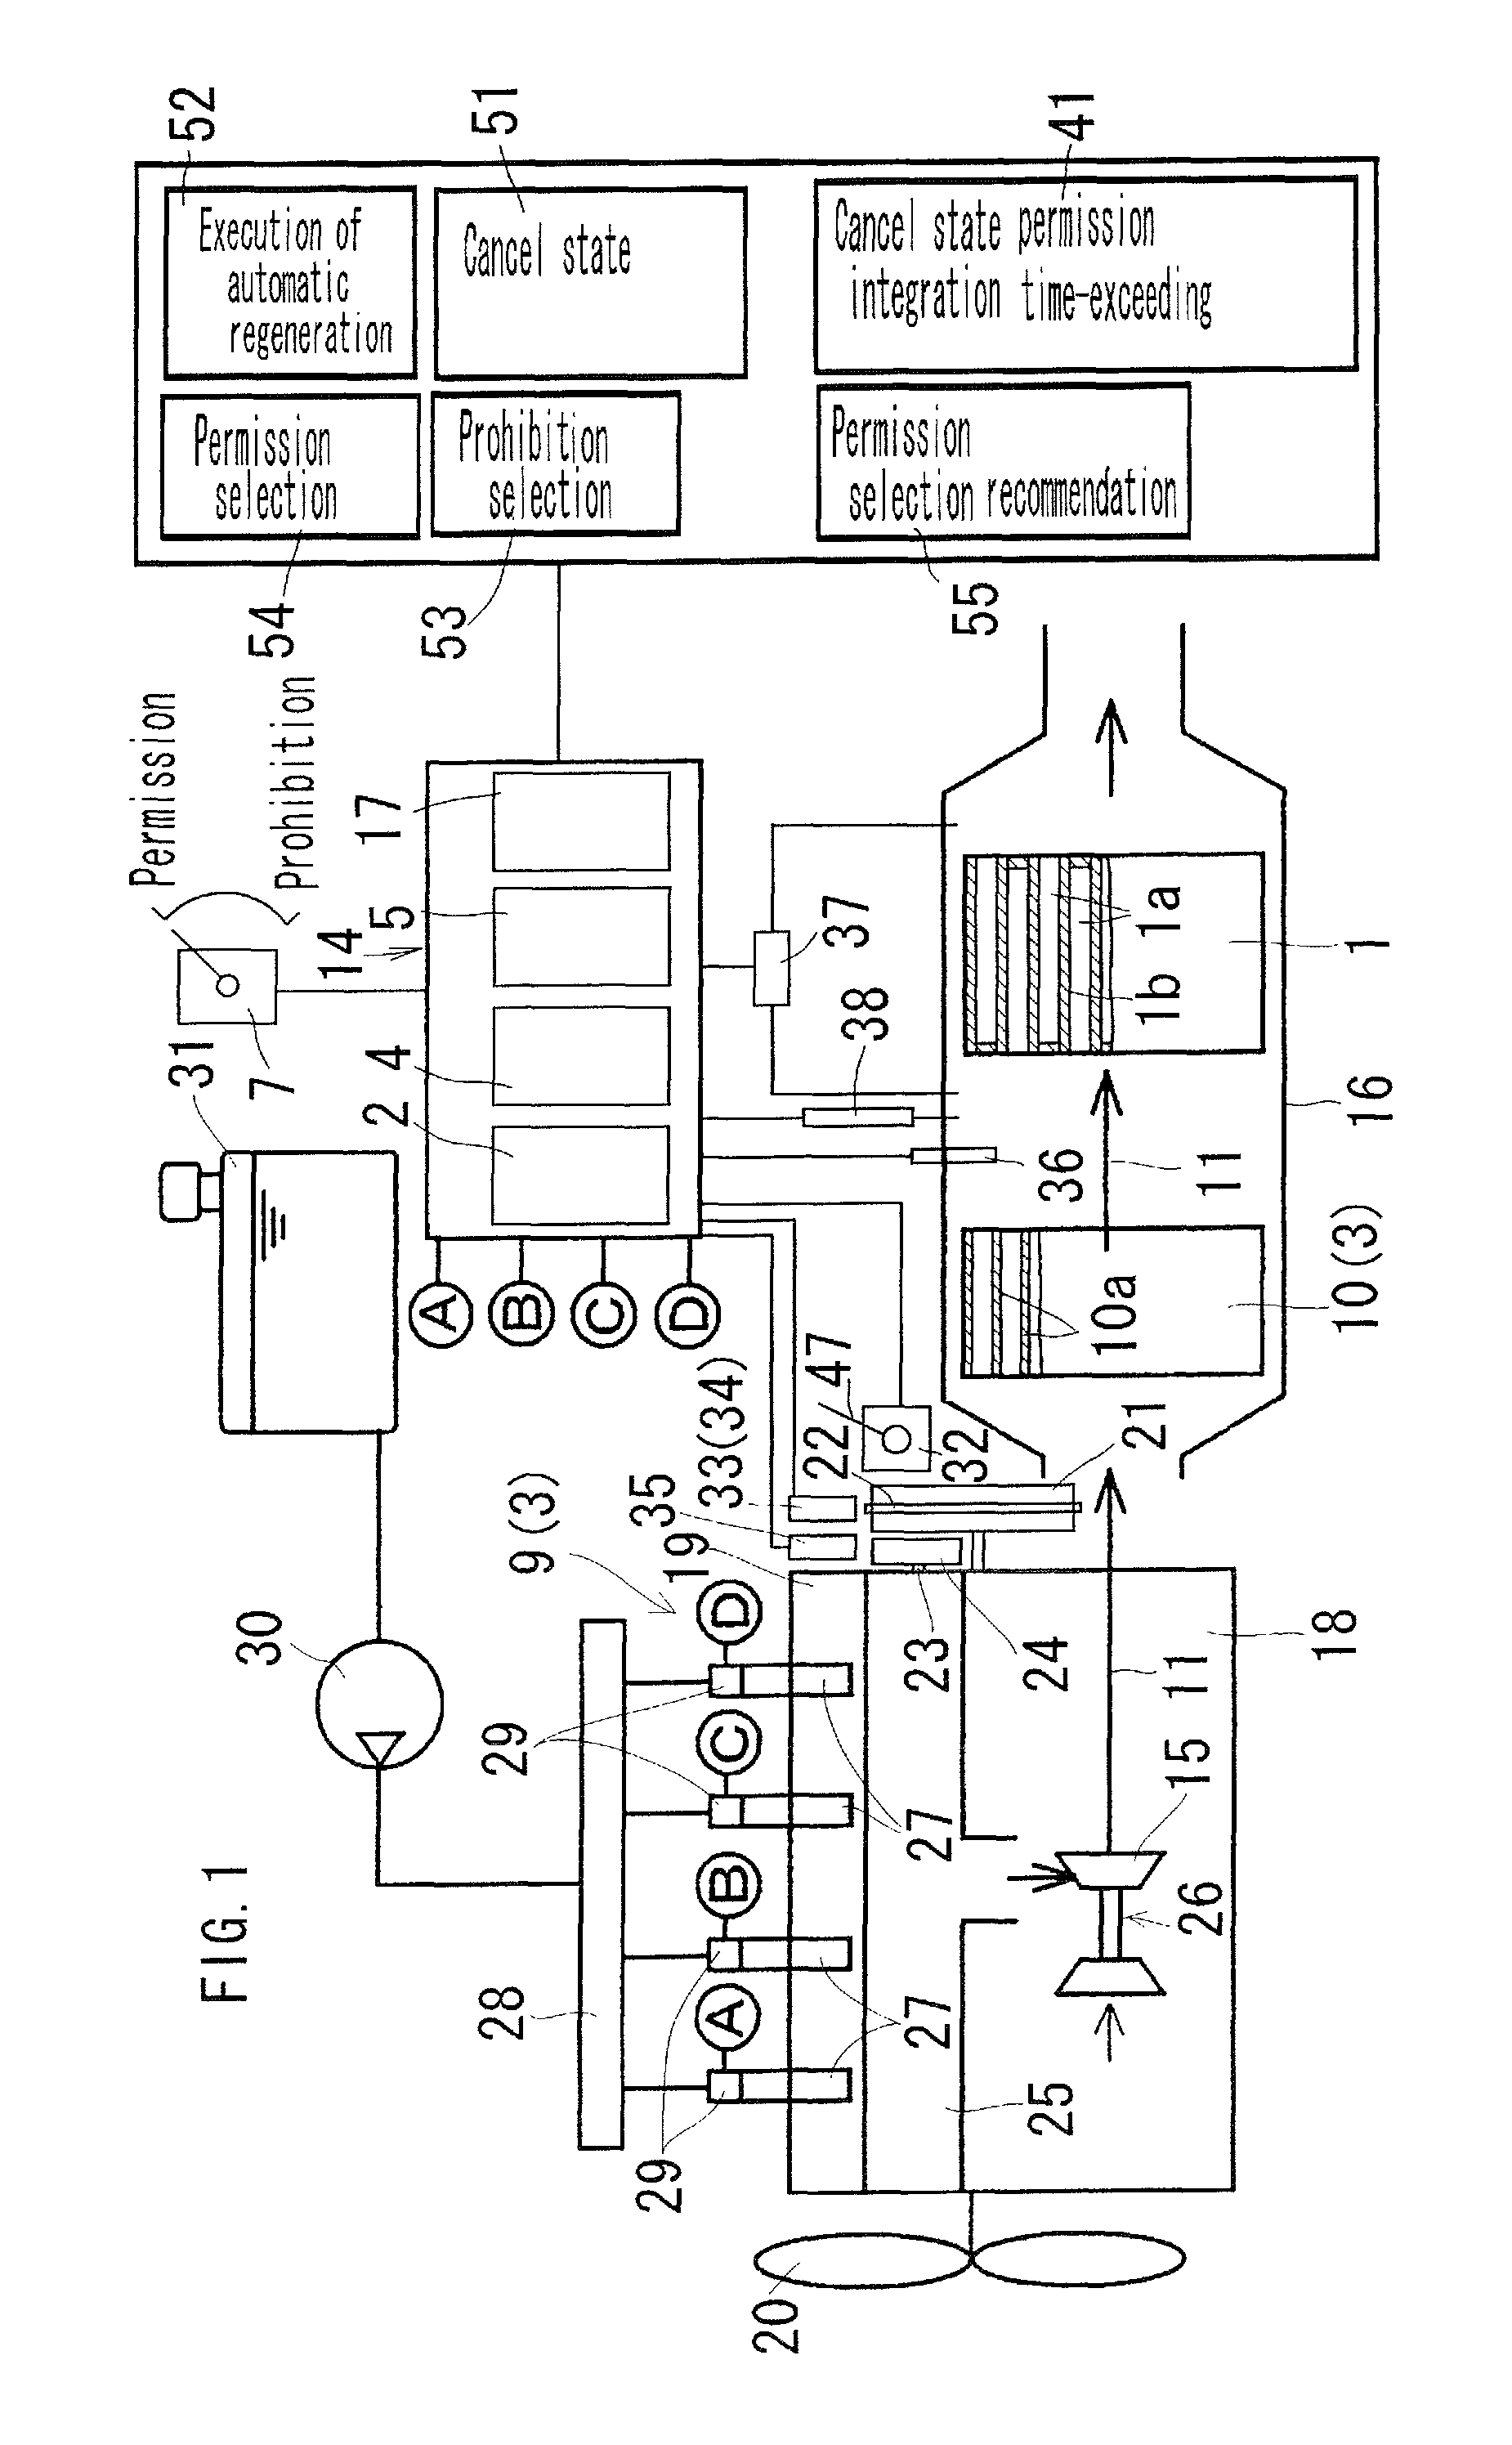 Exhaust treatment device for a diesel engine